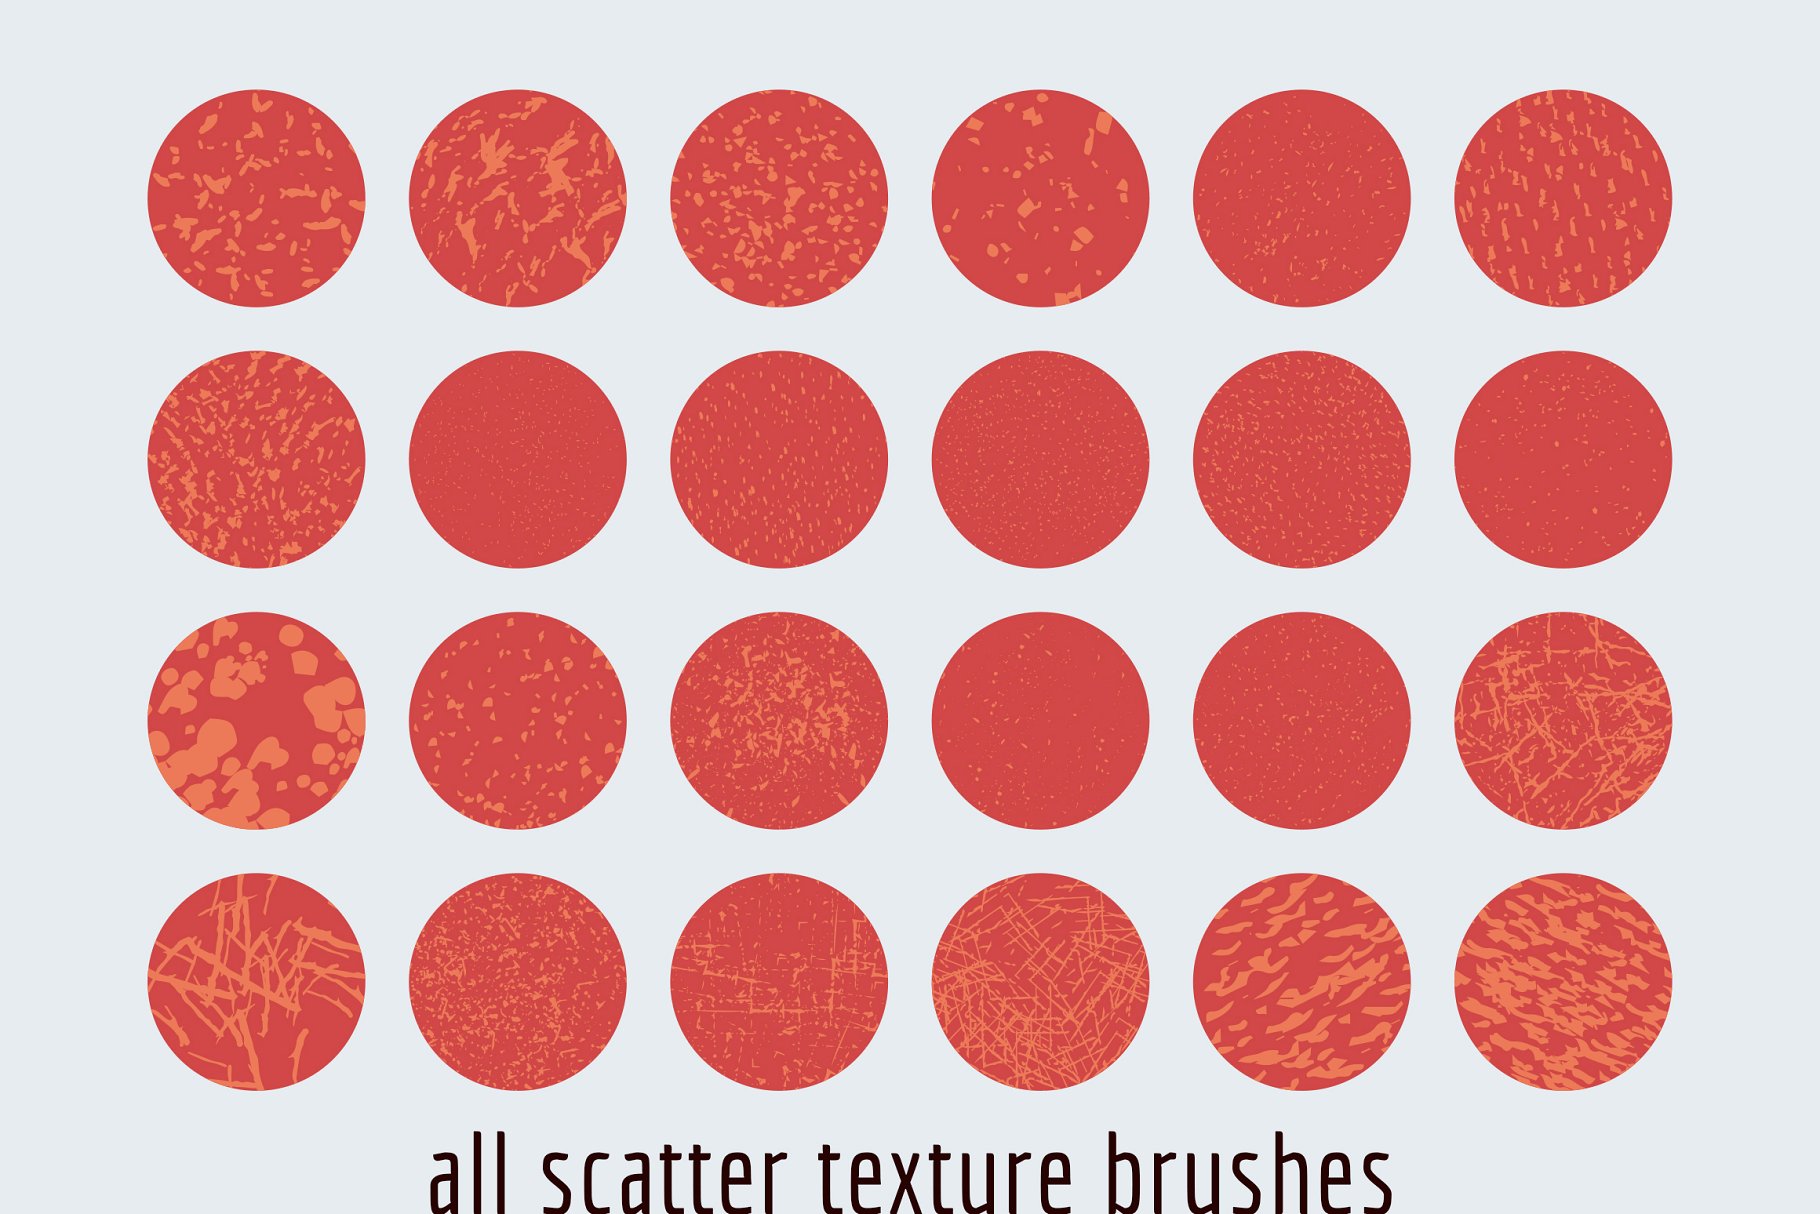 AI笔刷纹理素材 Scatter texture brushes for AI设计素材模板